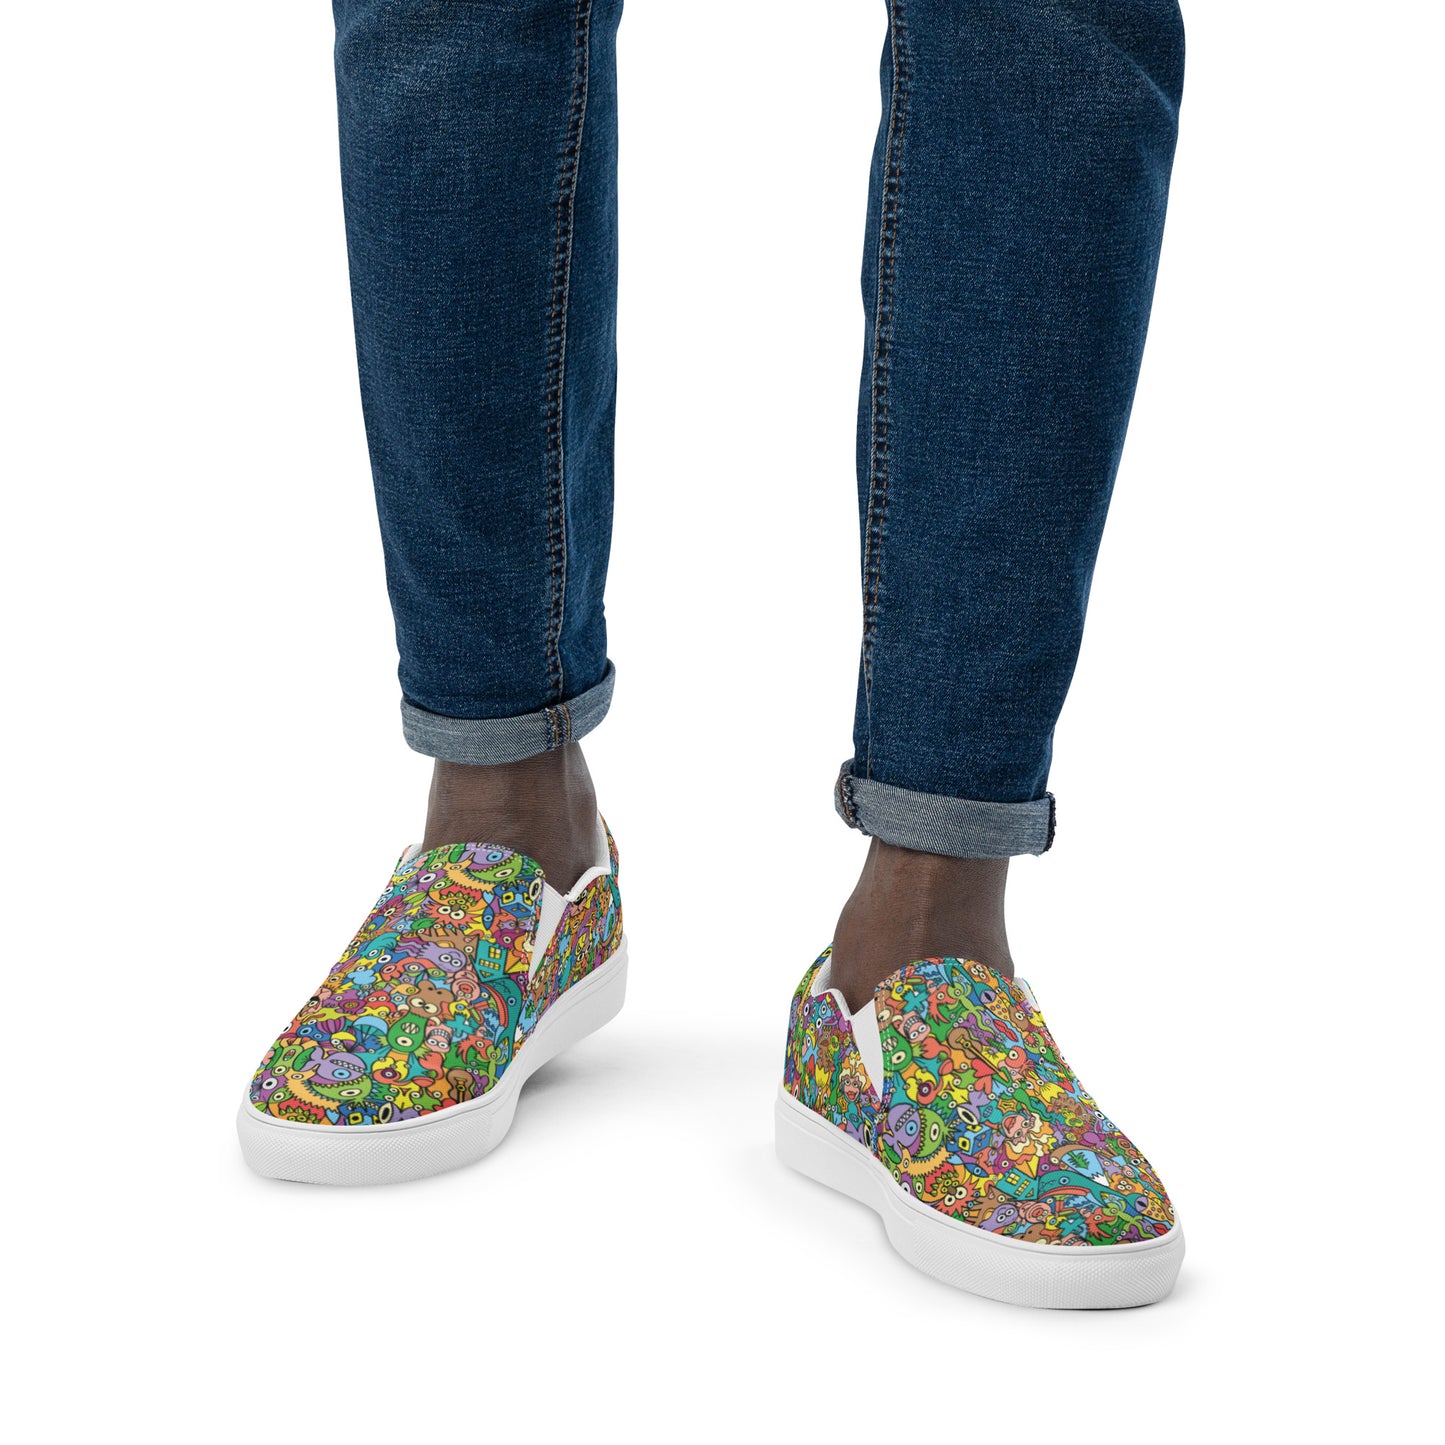 Cheerful crowd enjoying a lively carnival Men’s slip-on canvas shoes. Lifestyle